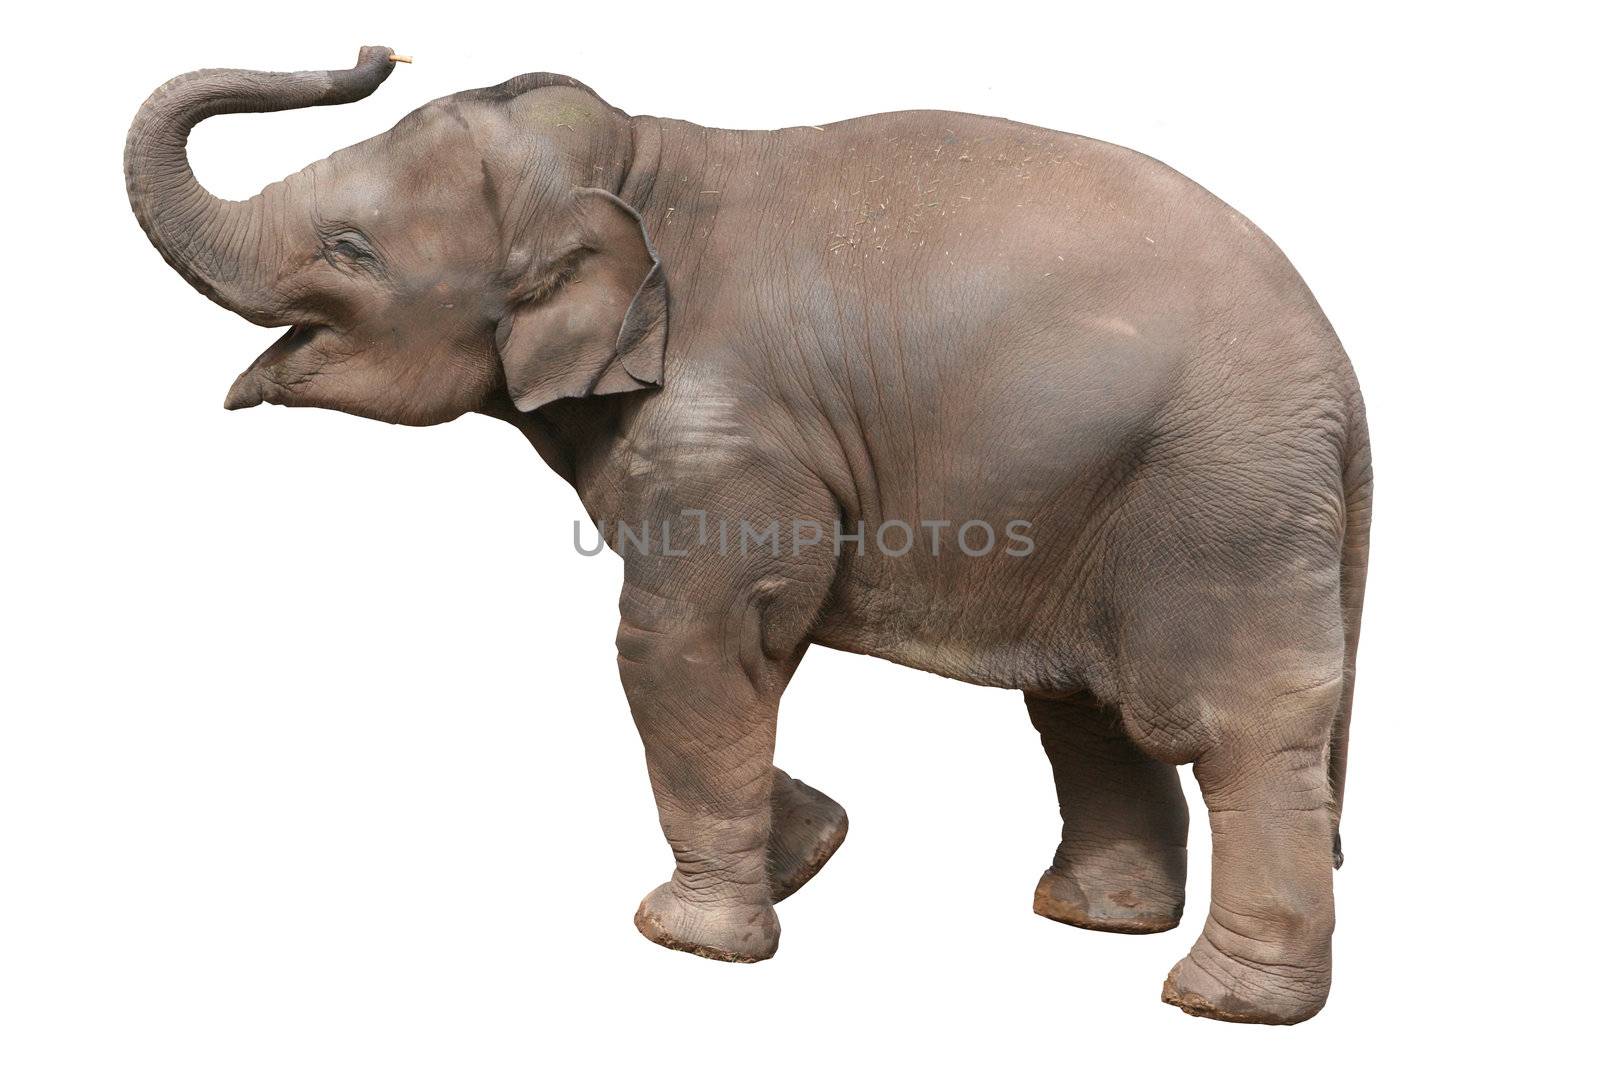 A baby elephant, isolated with clipping path.